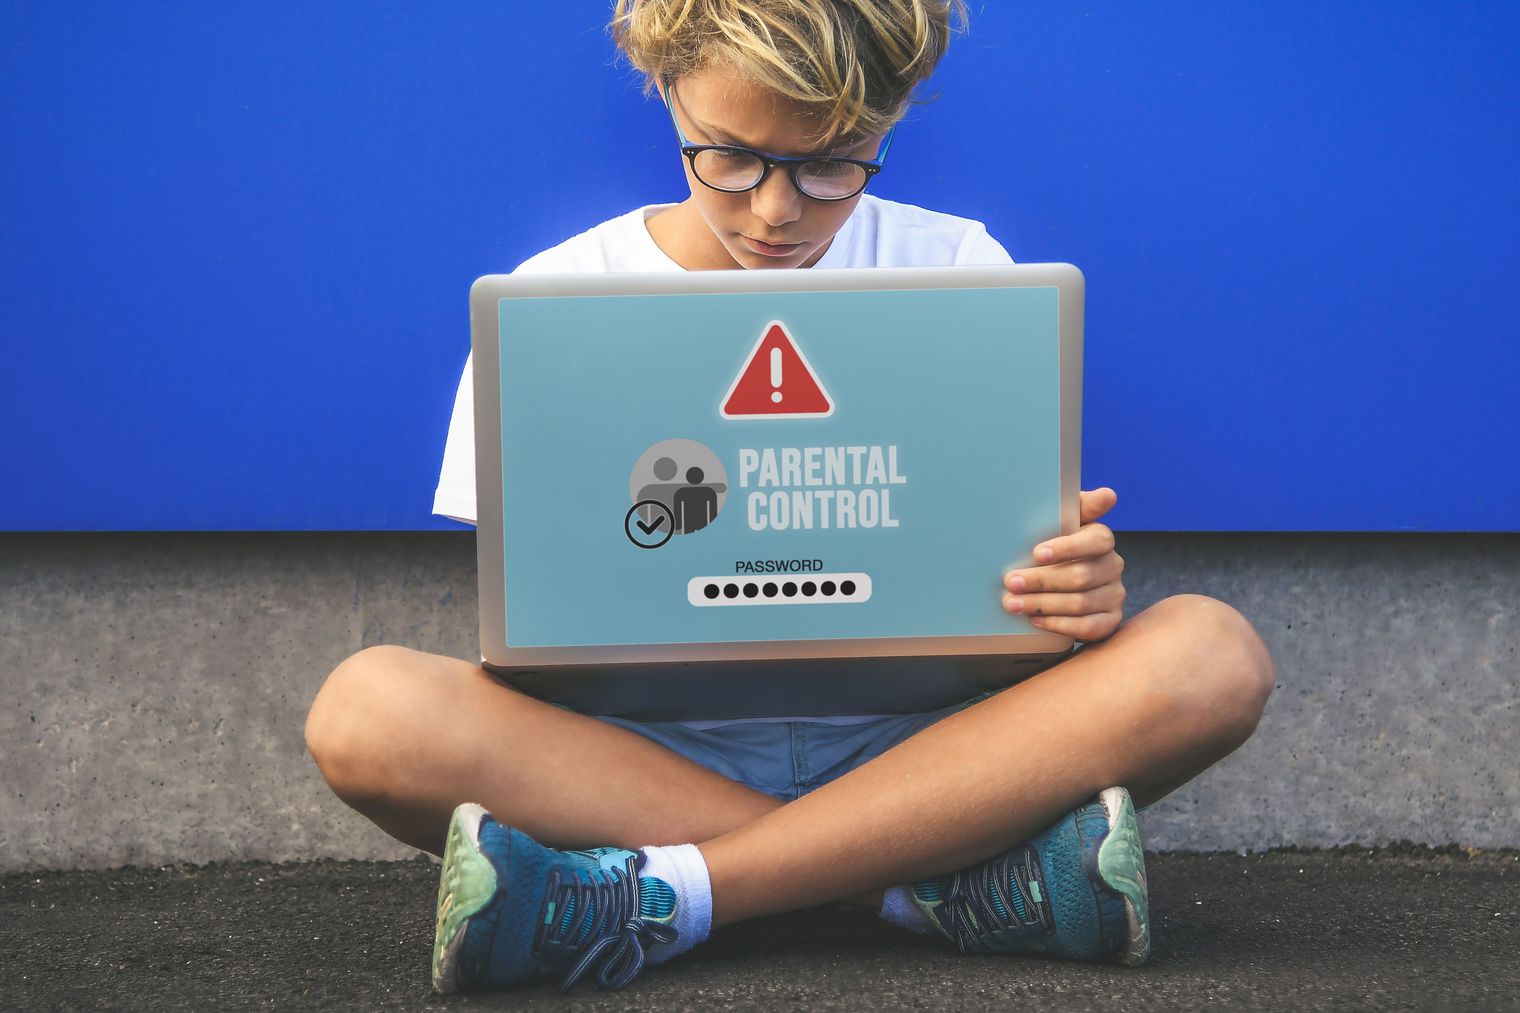 adolescent boy sitting with laptop. Text says Parental Control.